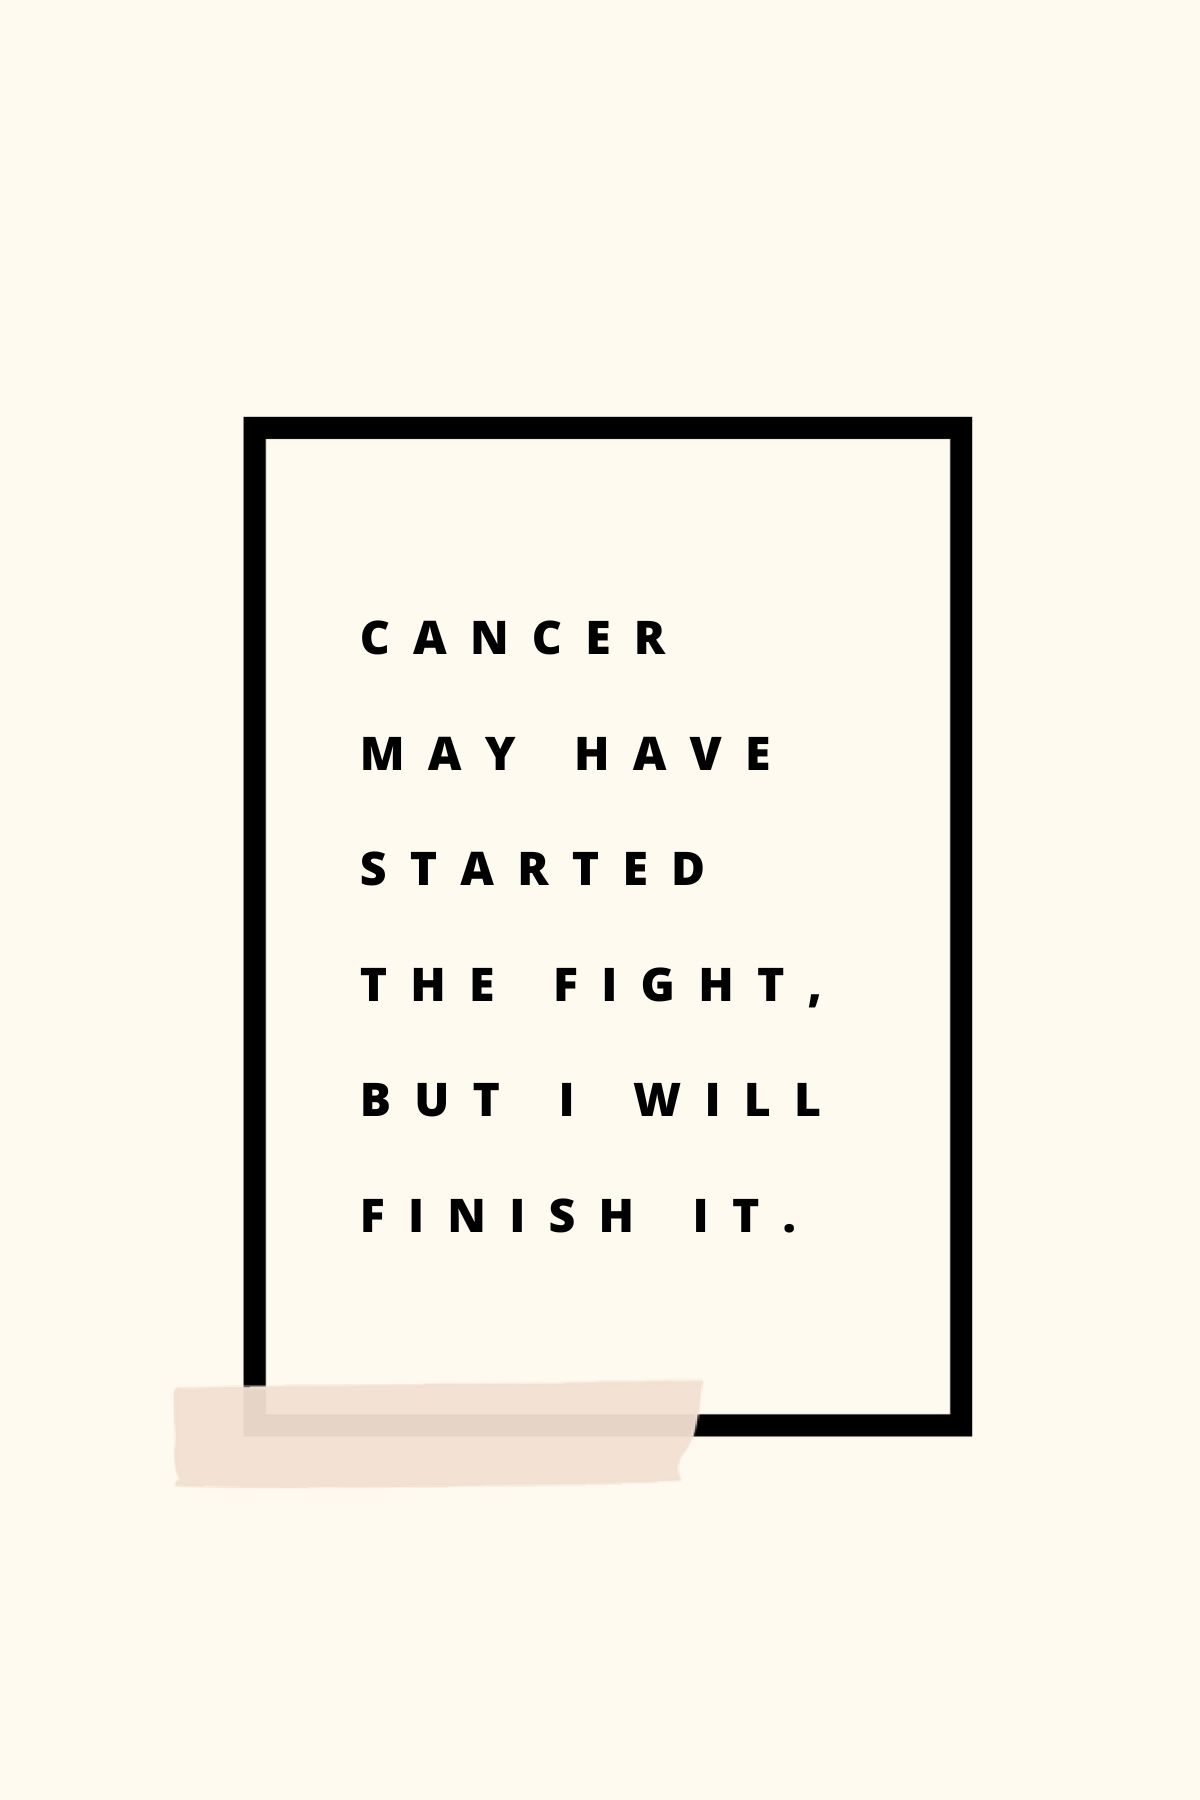 cancer may have started the fight, but I will finish it.